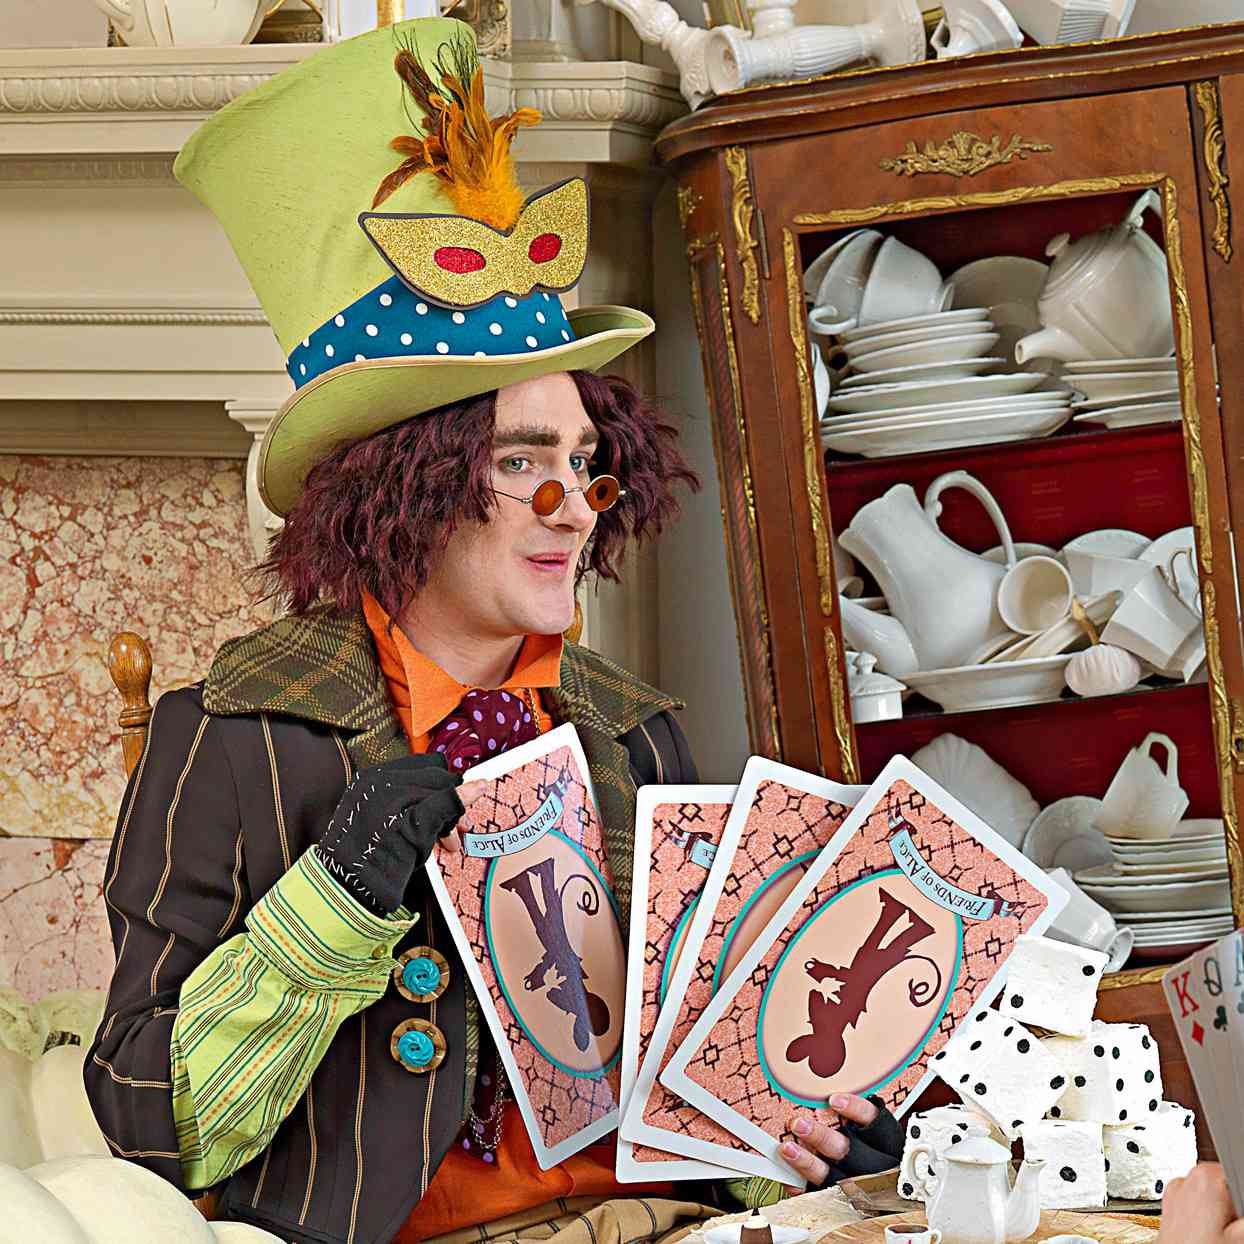 Alice-theme playing cards